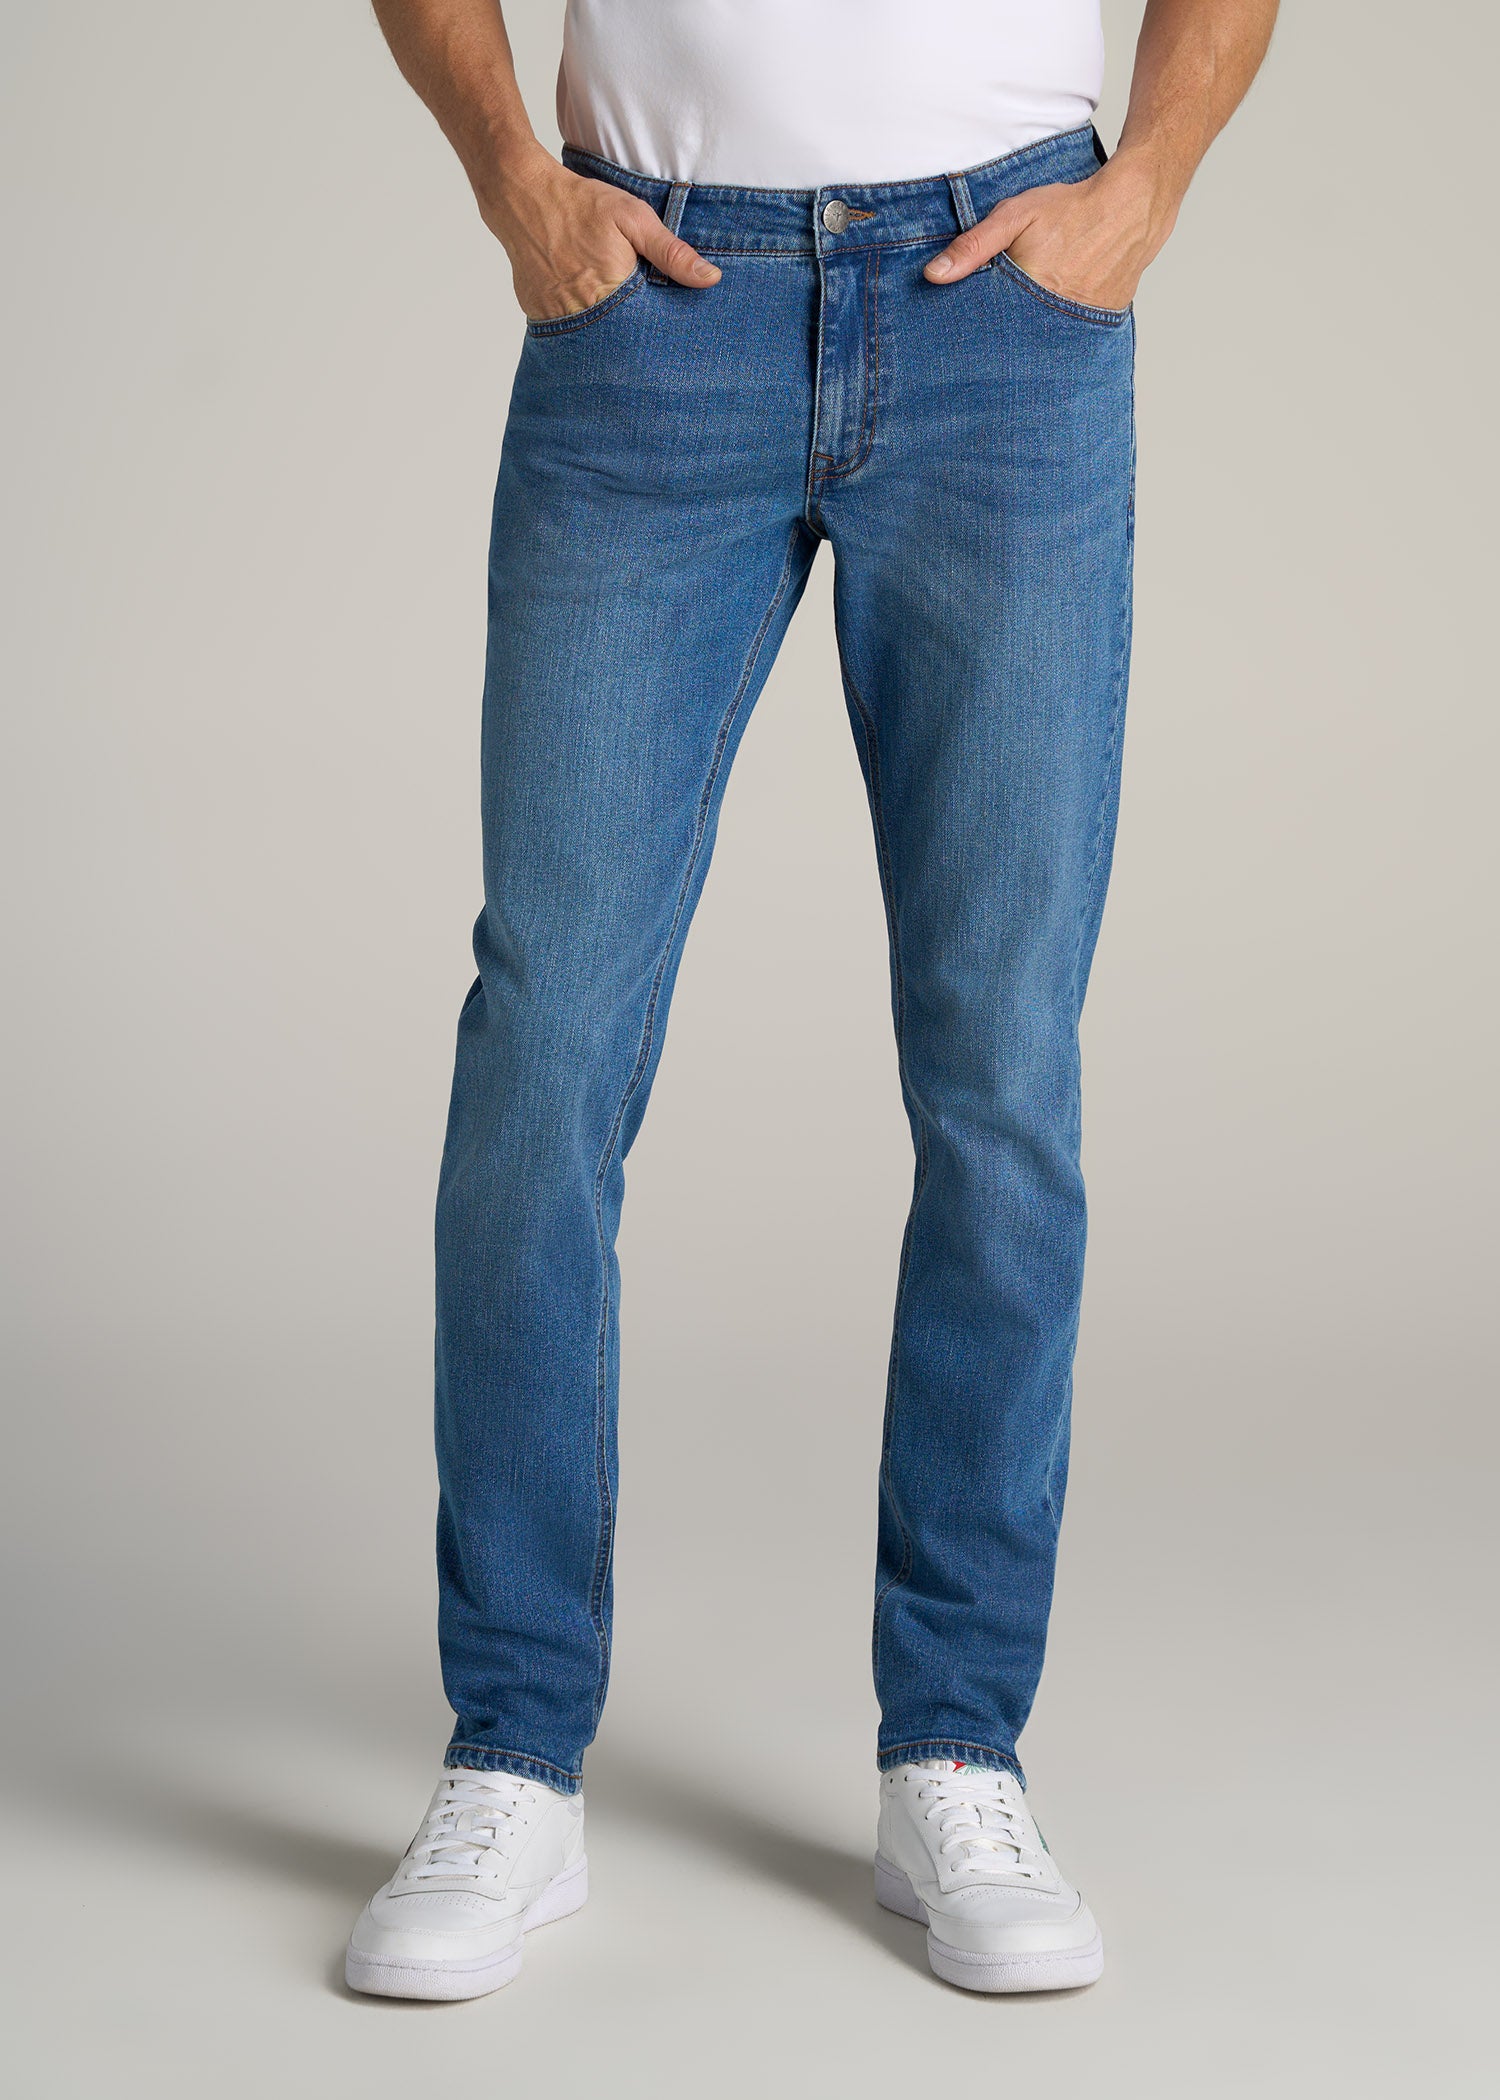 Carman Tapered Jeans For Tall Men Classic Mid Blue